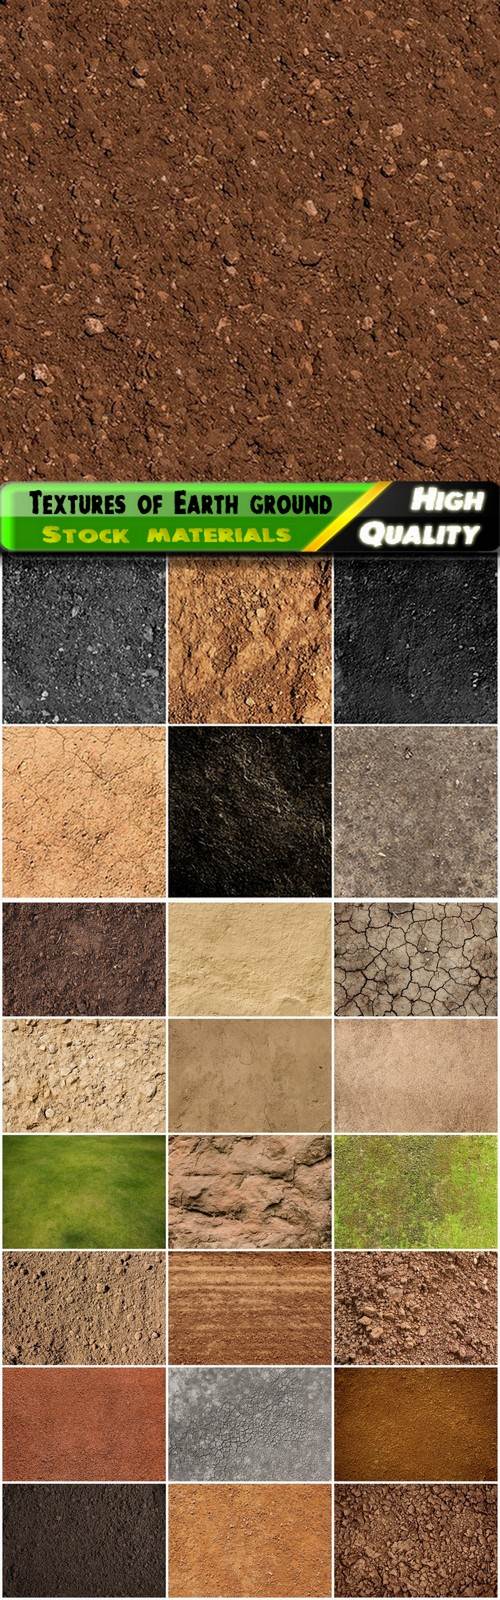 Backgrounds and textures of Earth ground - 25 HQ Jpg